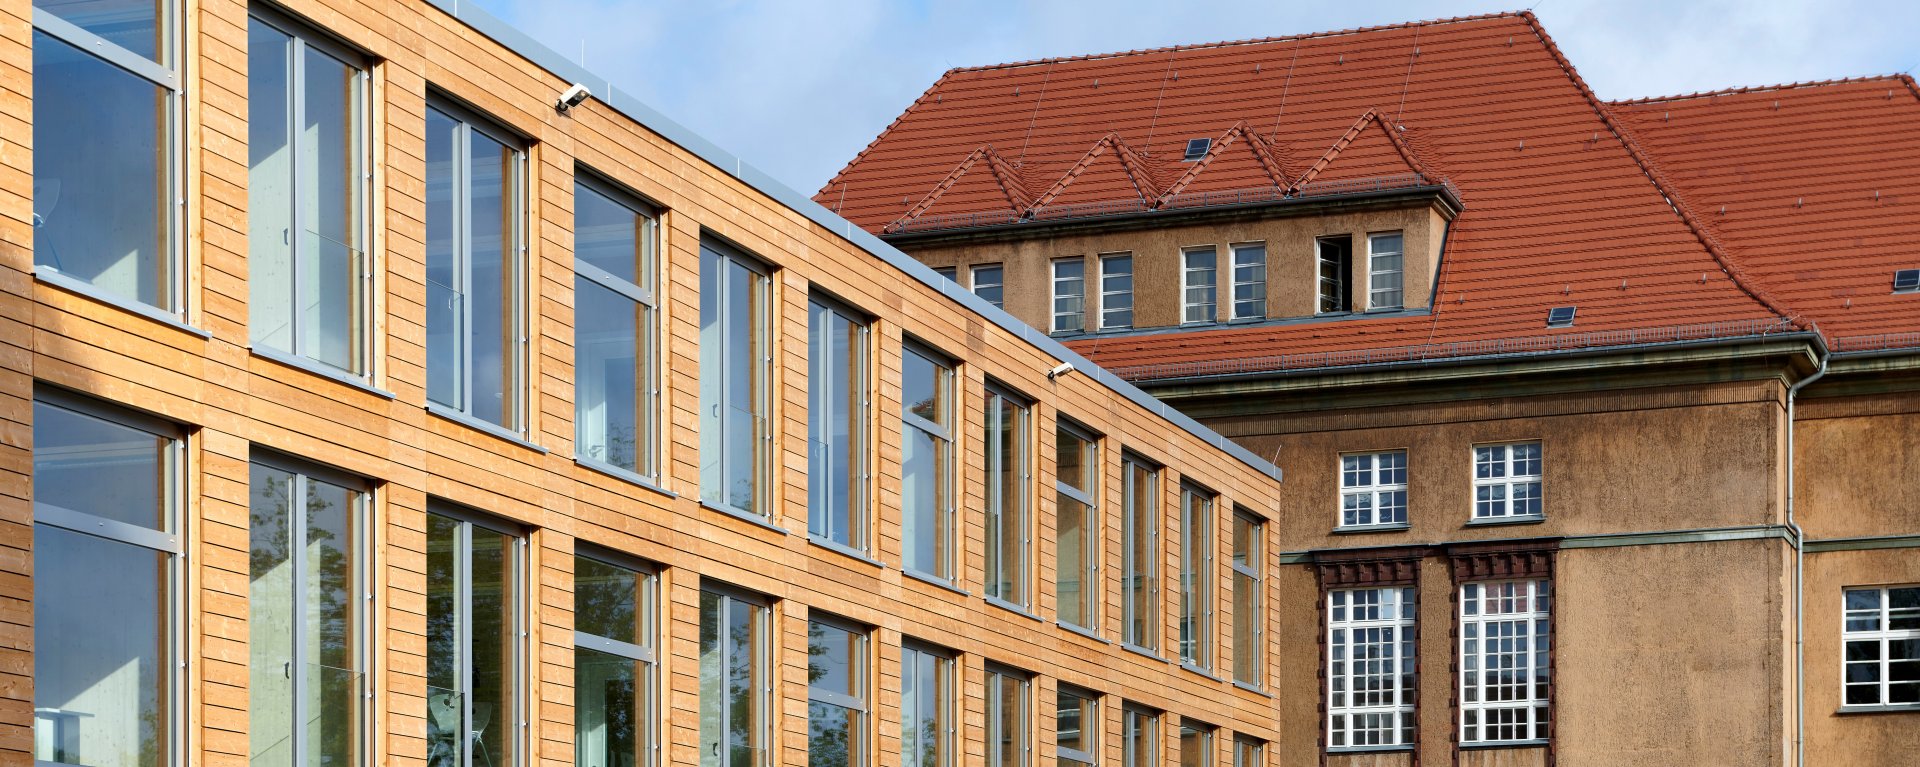 Müggelsee-Schule, a new building with flat roof and wooden facade is connected to a historic building facade